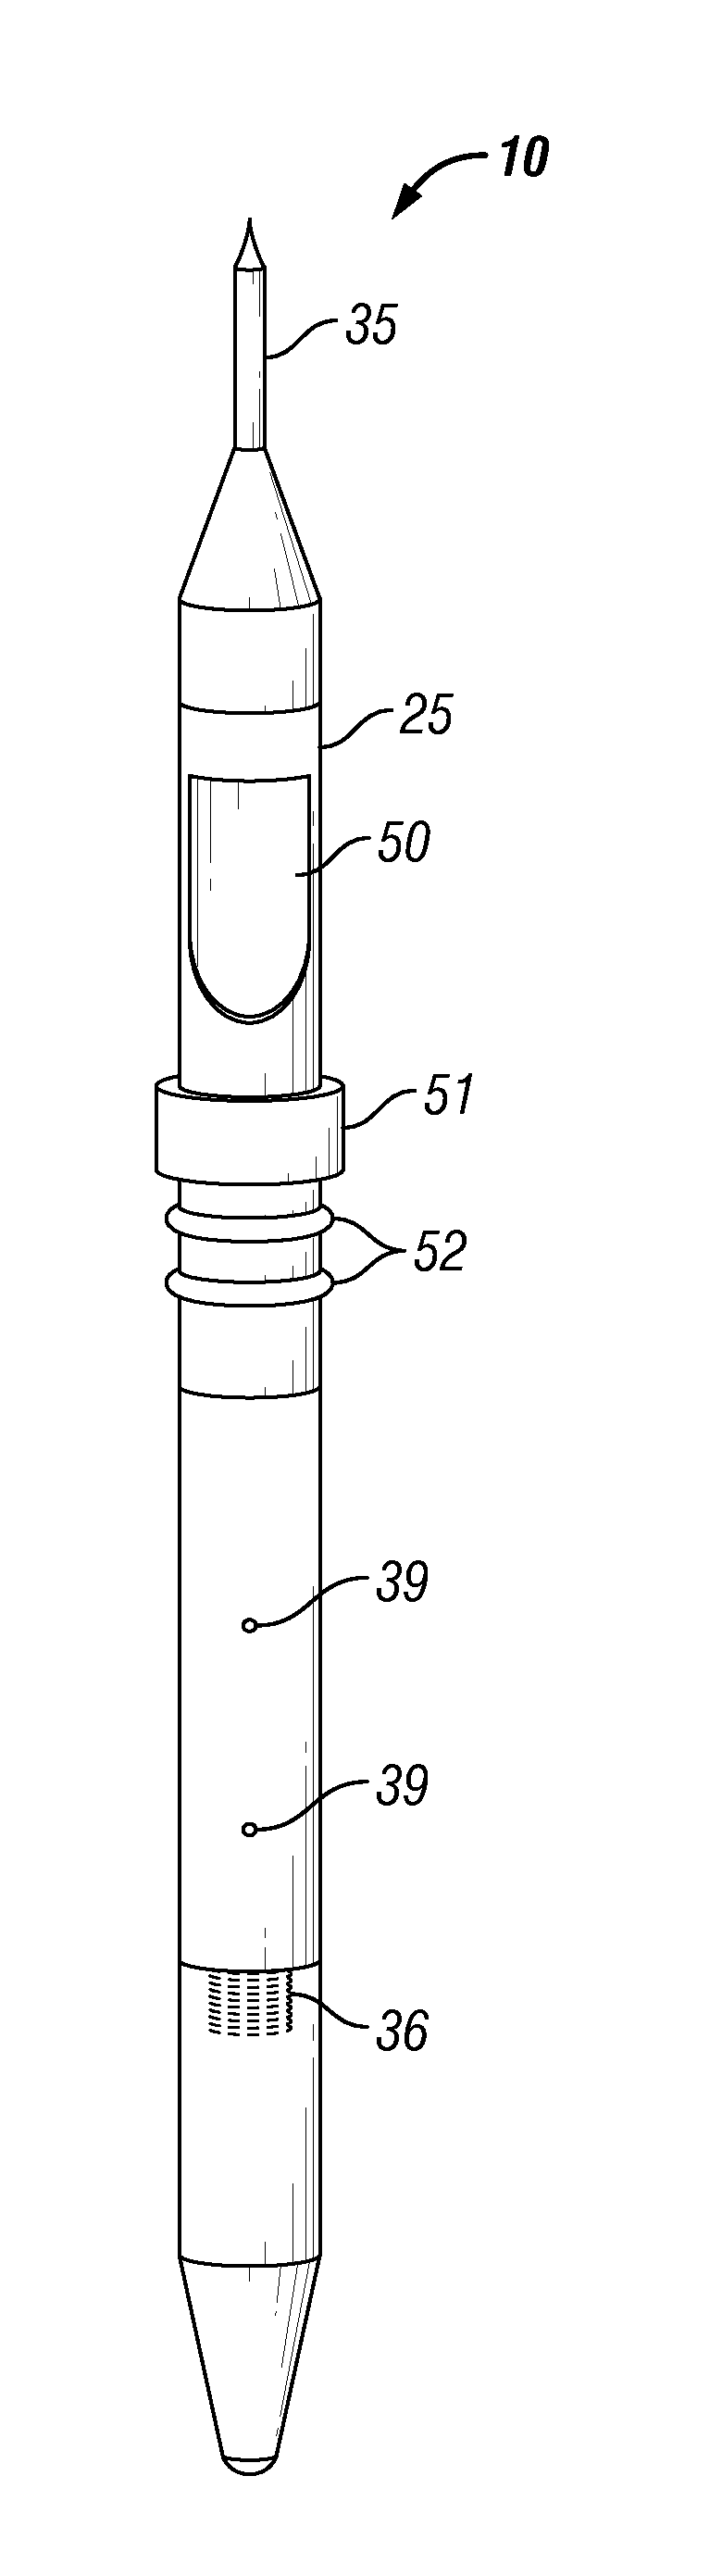 Apparatus and method for jet perforating and cutting tool